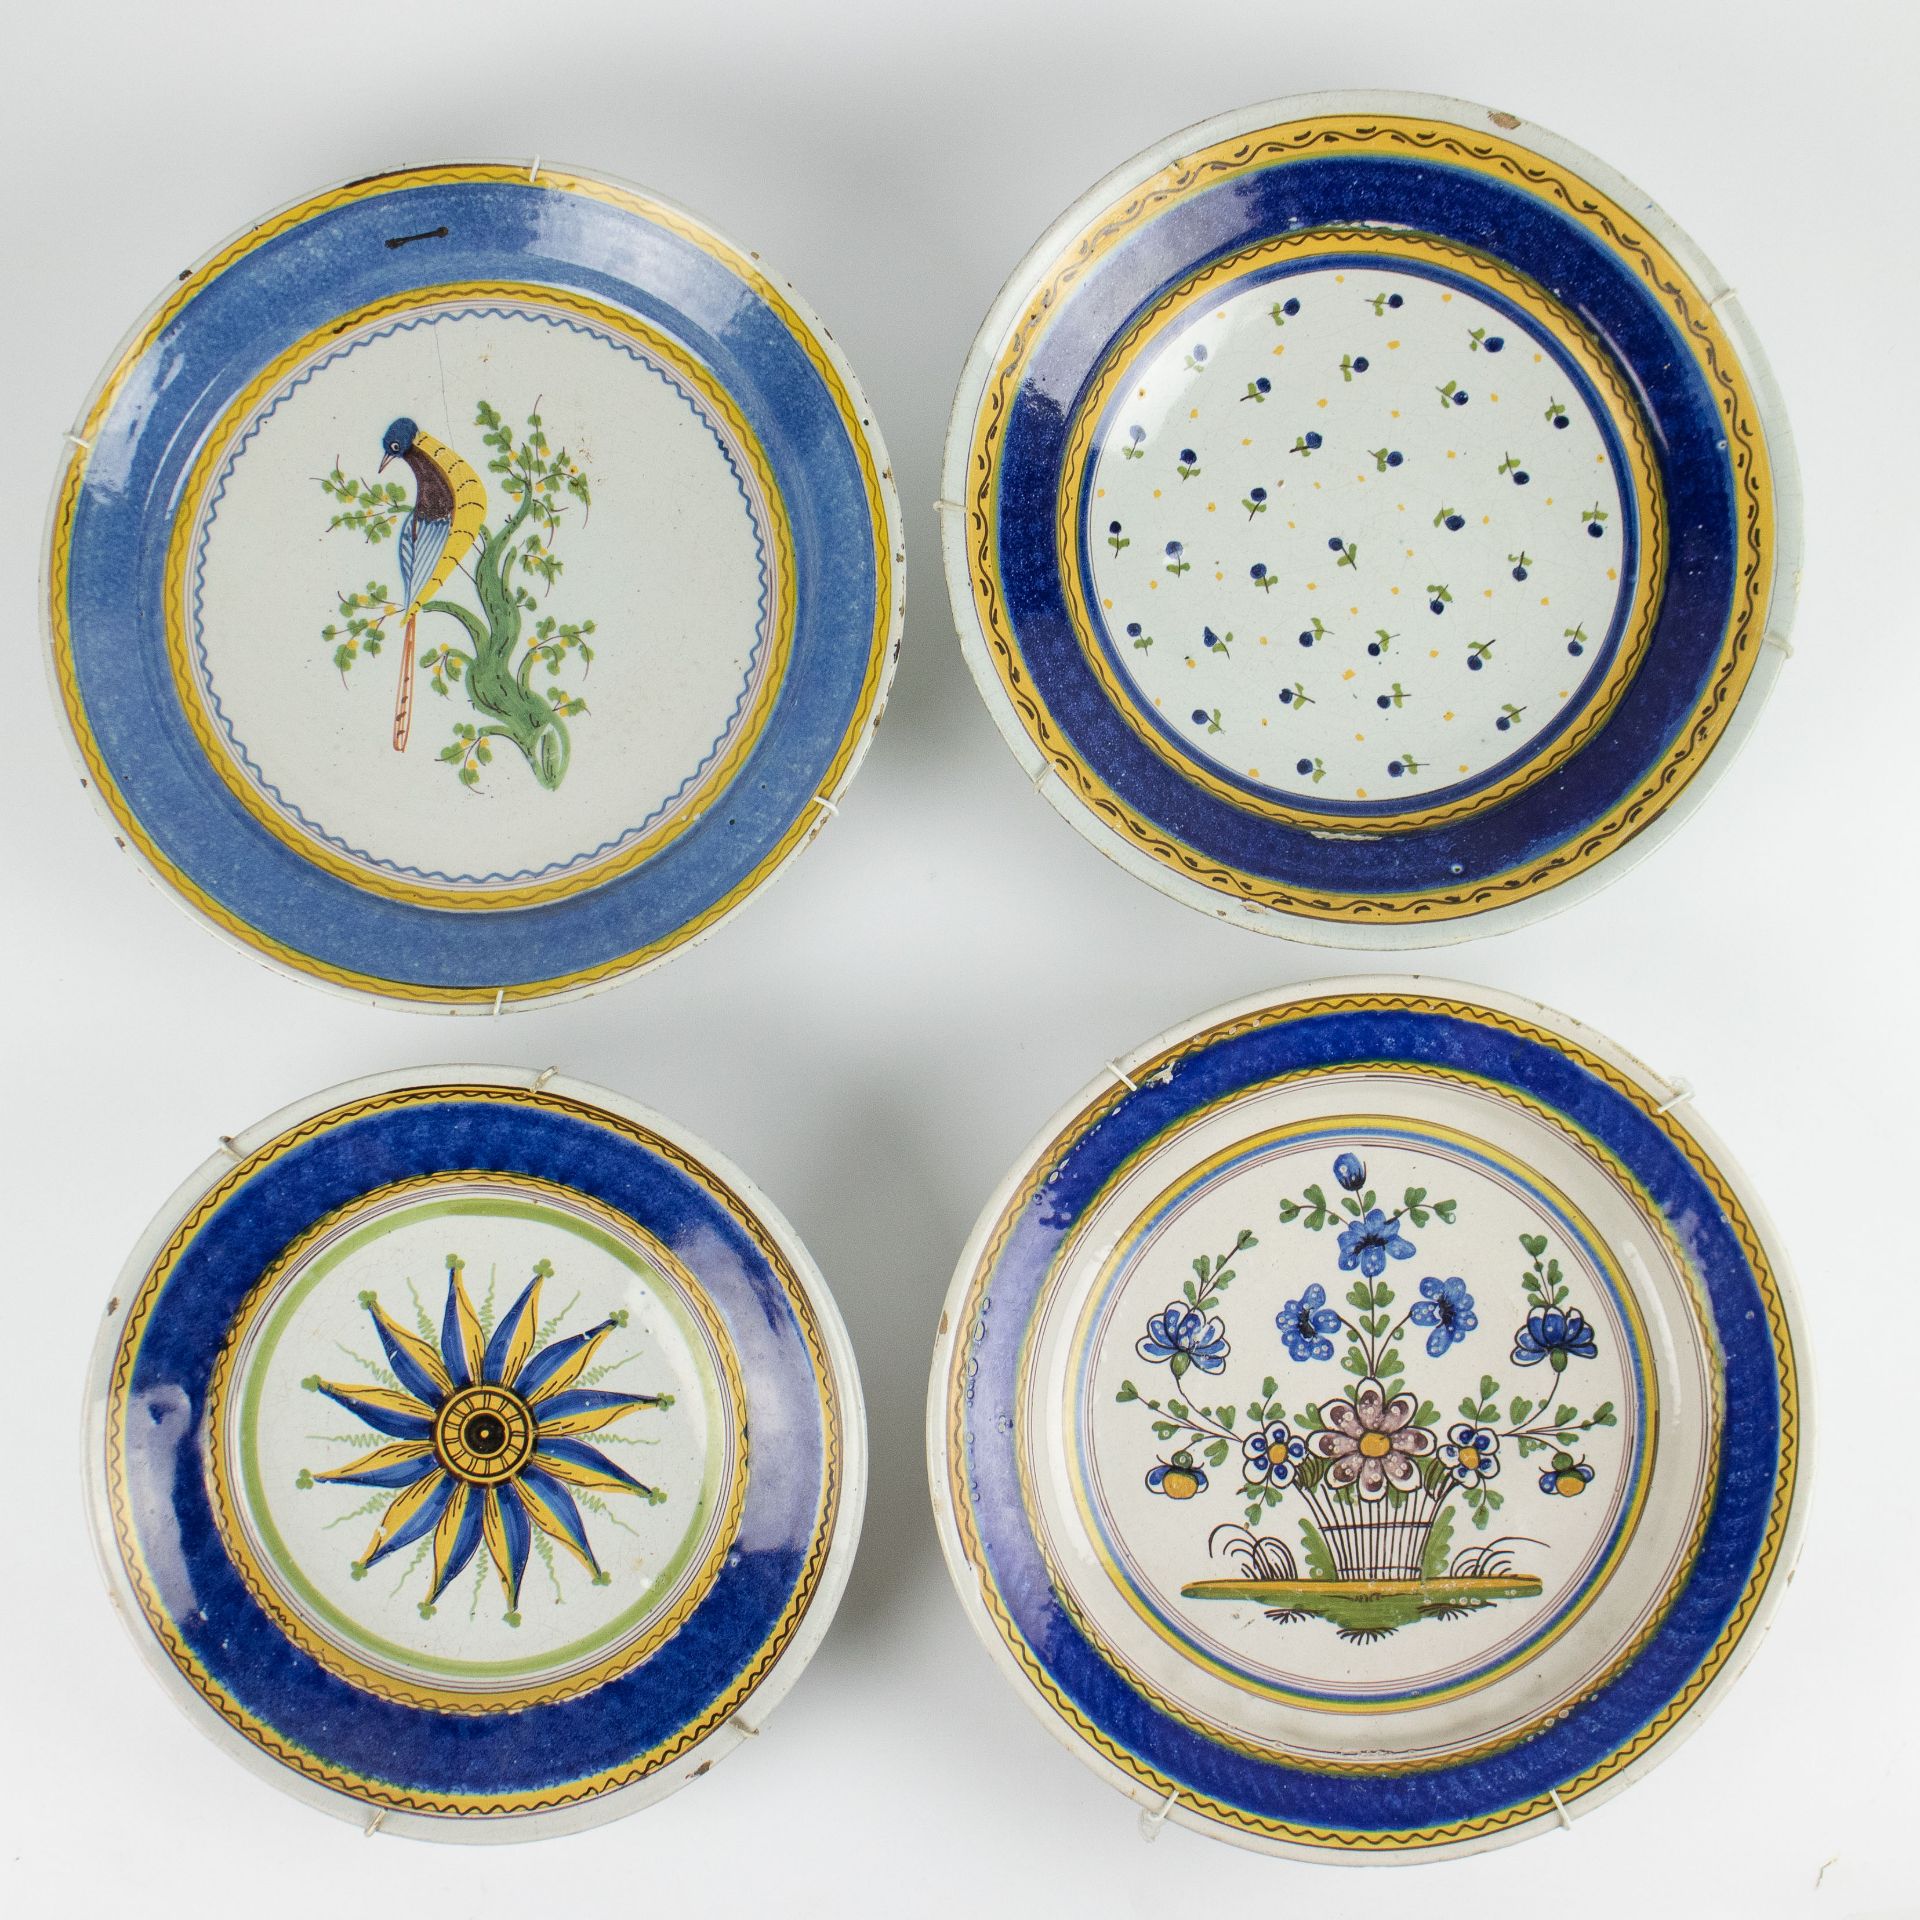 A collection of 4 polychrome plates Brussels circa 1800